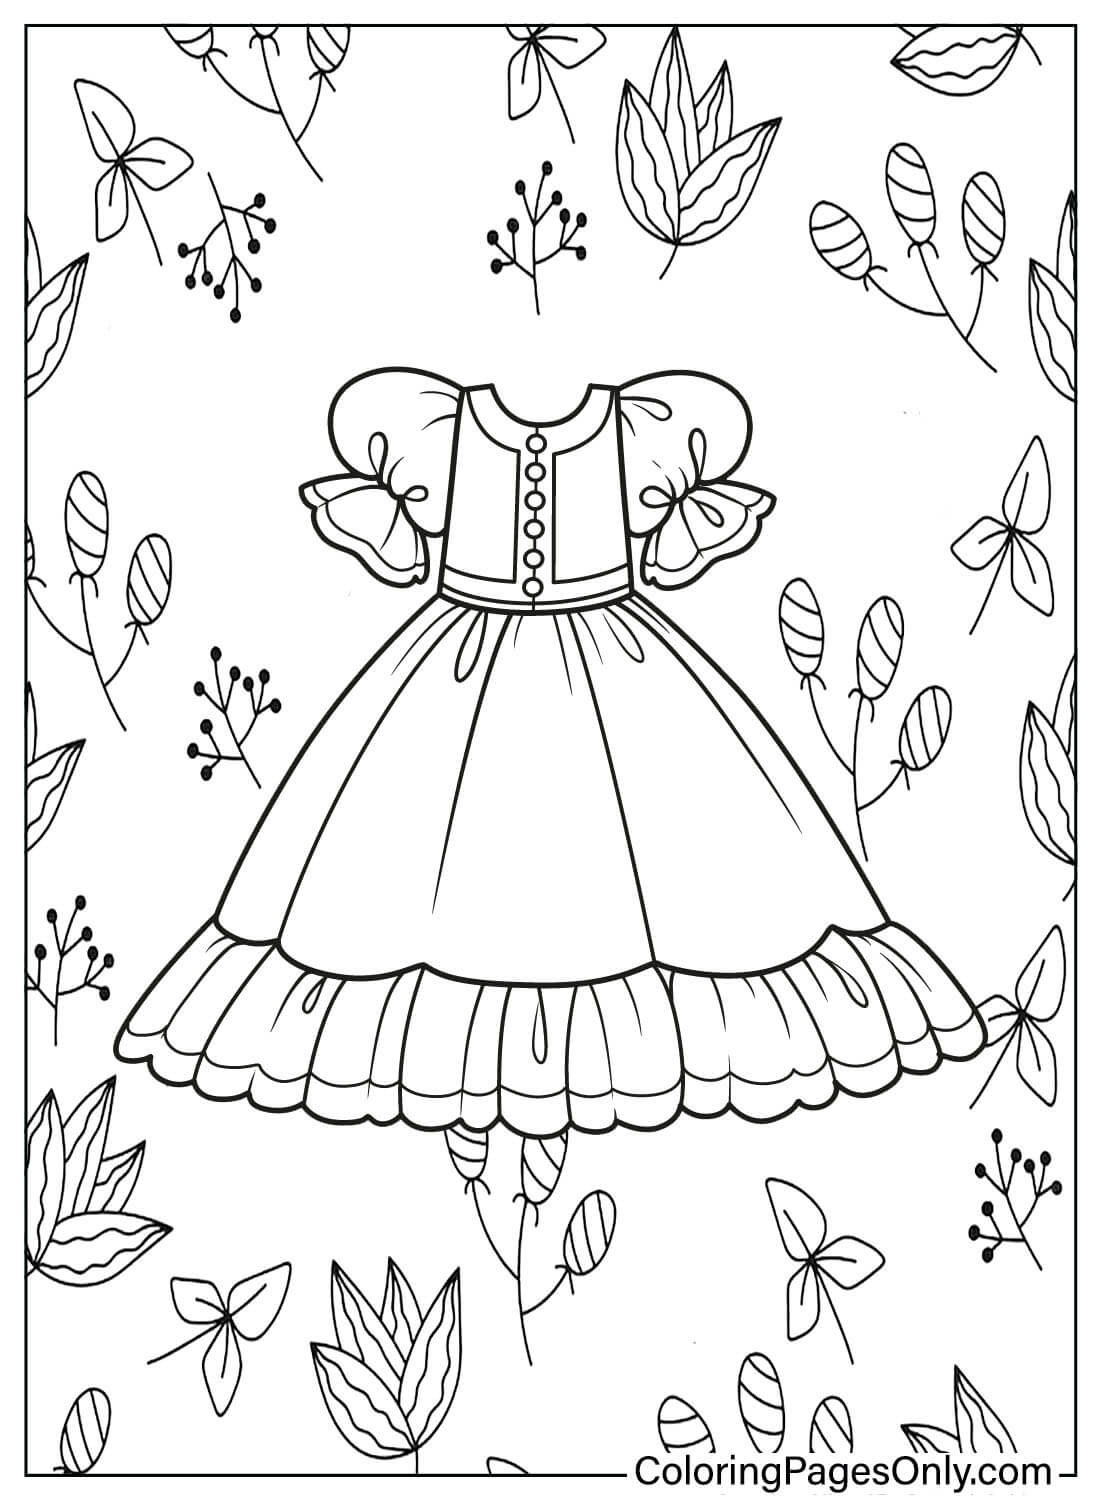 Color Page Baby Dress from Baby Dress